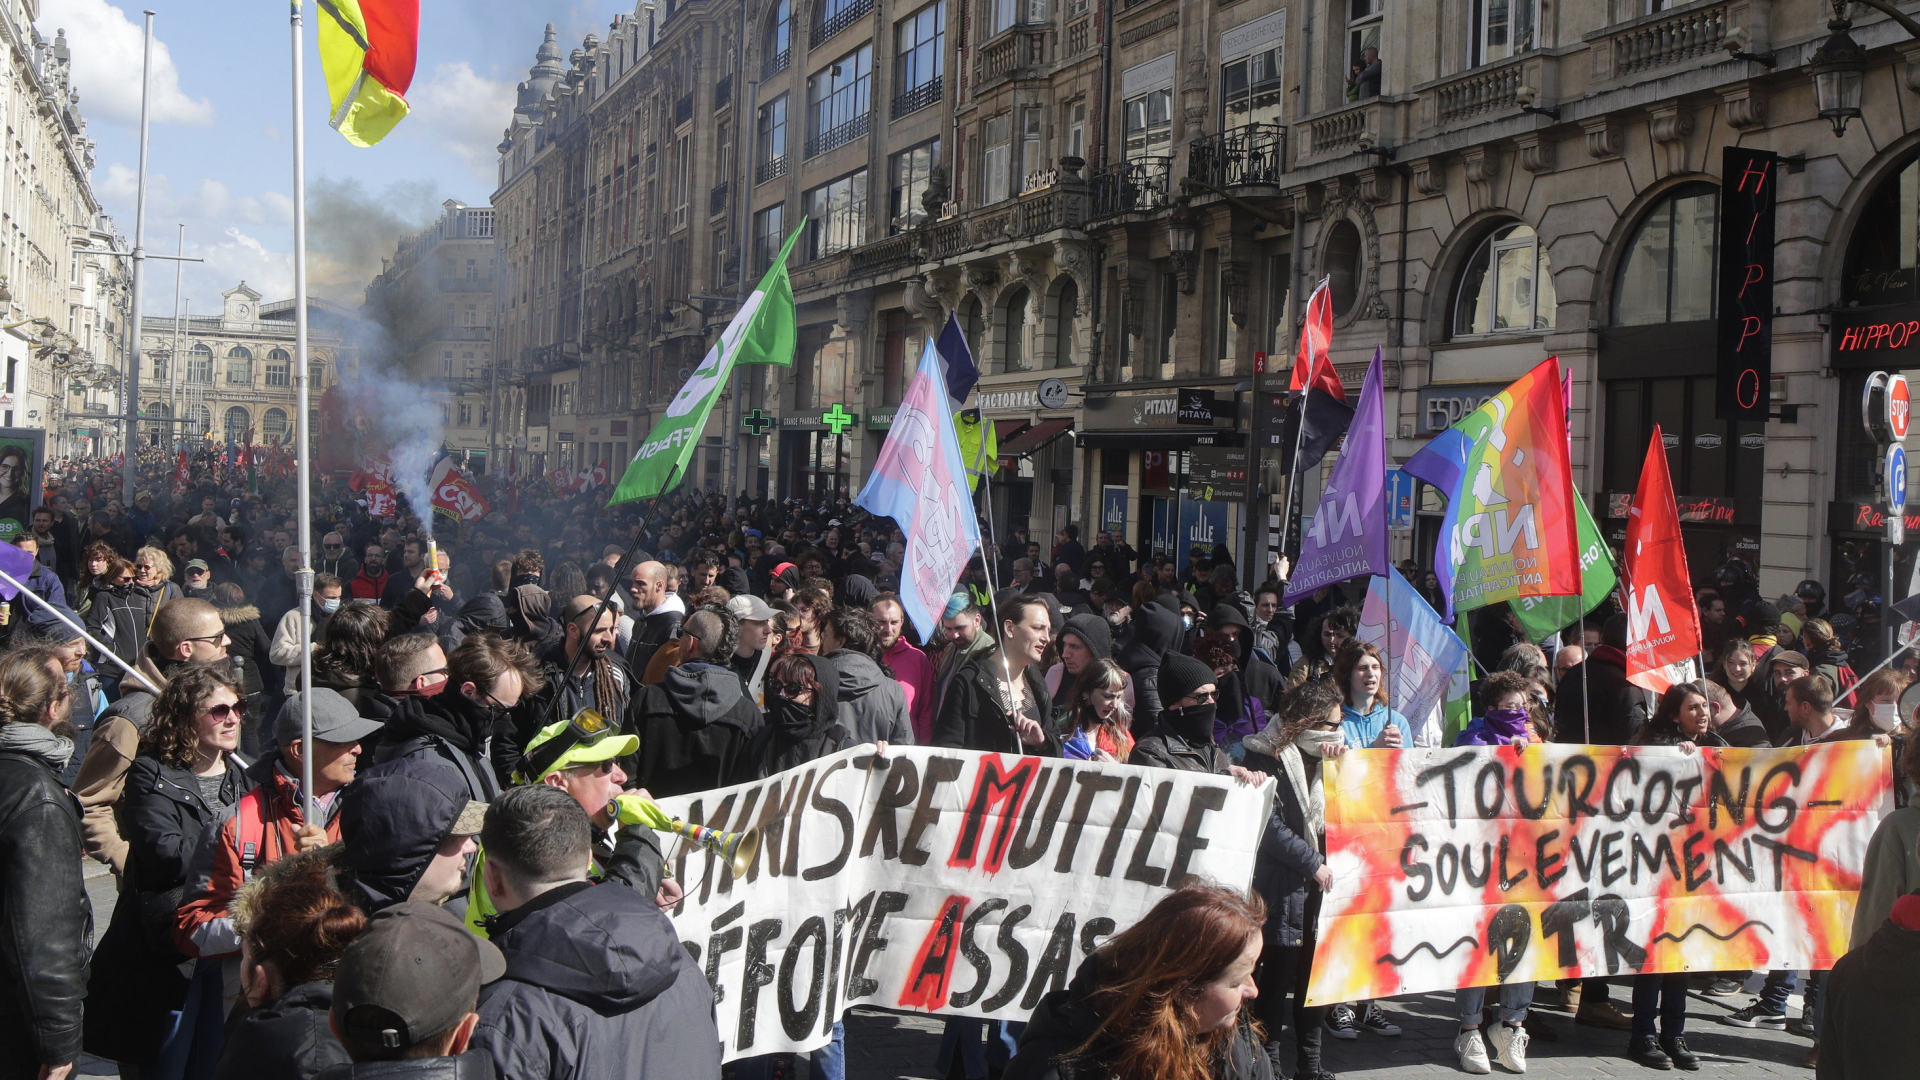 Day of action against pension reform: protests again in the streets of France